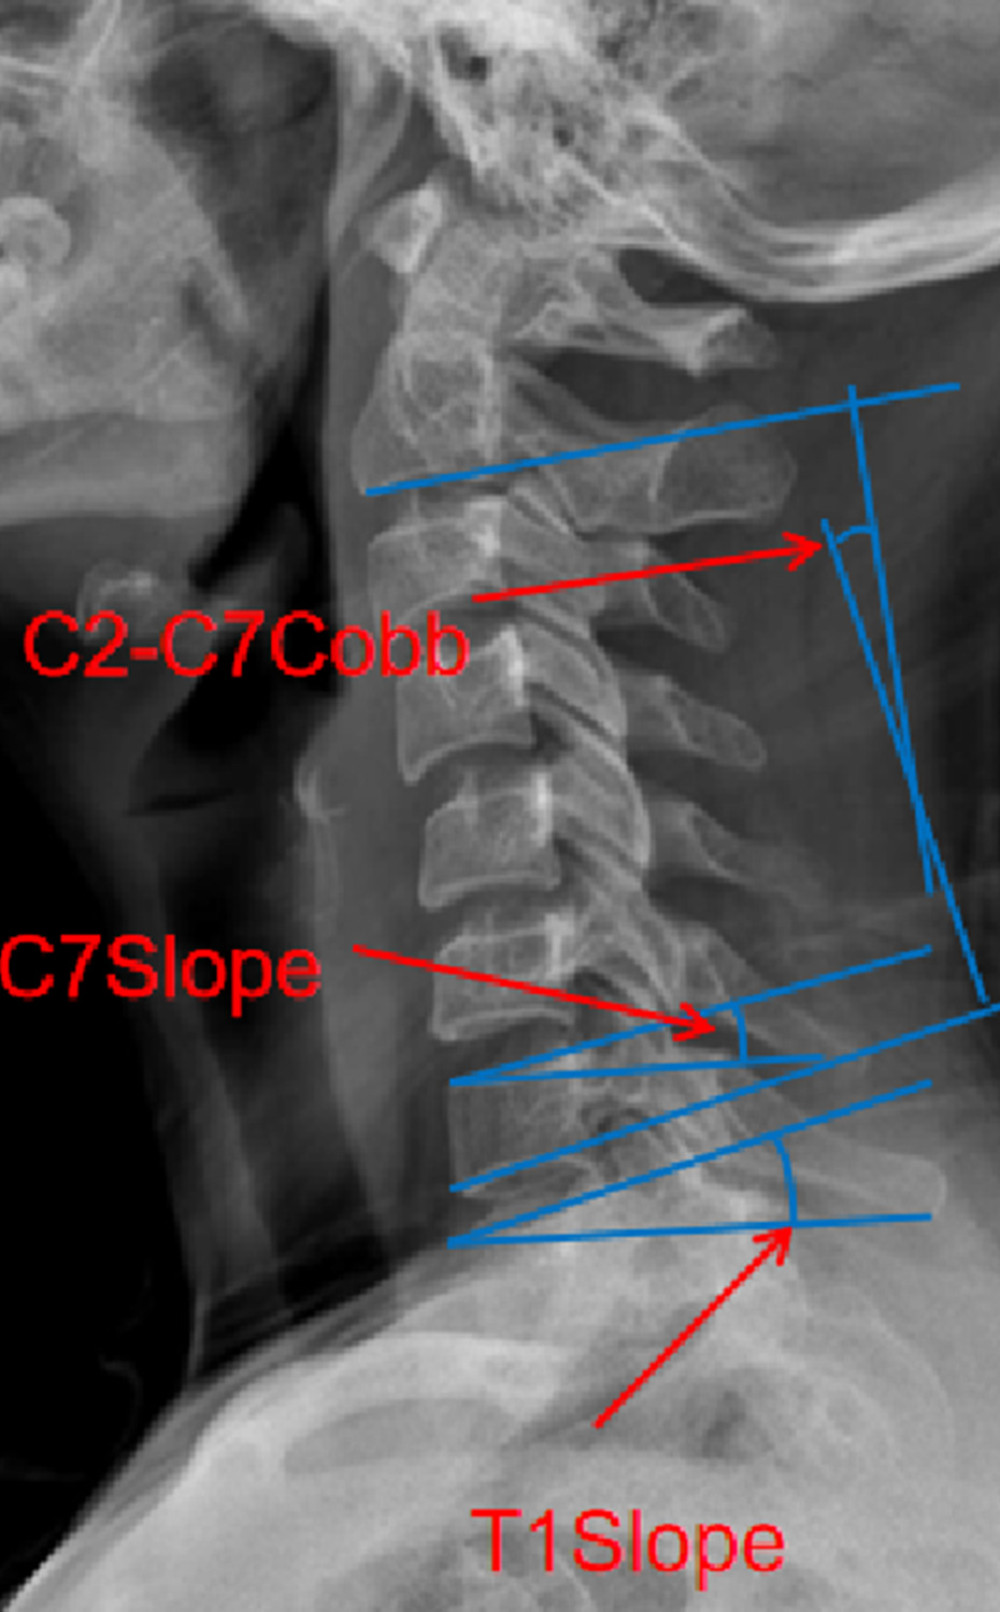 Measurements of the radiological parameters C7 slope, T1 slope, C2–C7 Cobb on a cervical lateral radiograph.